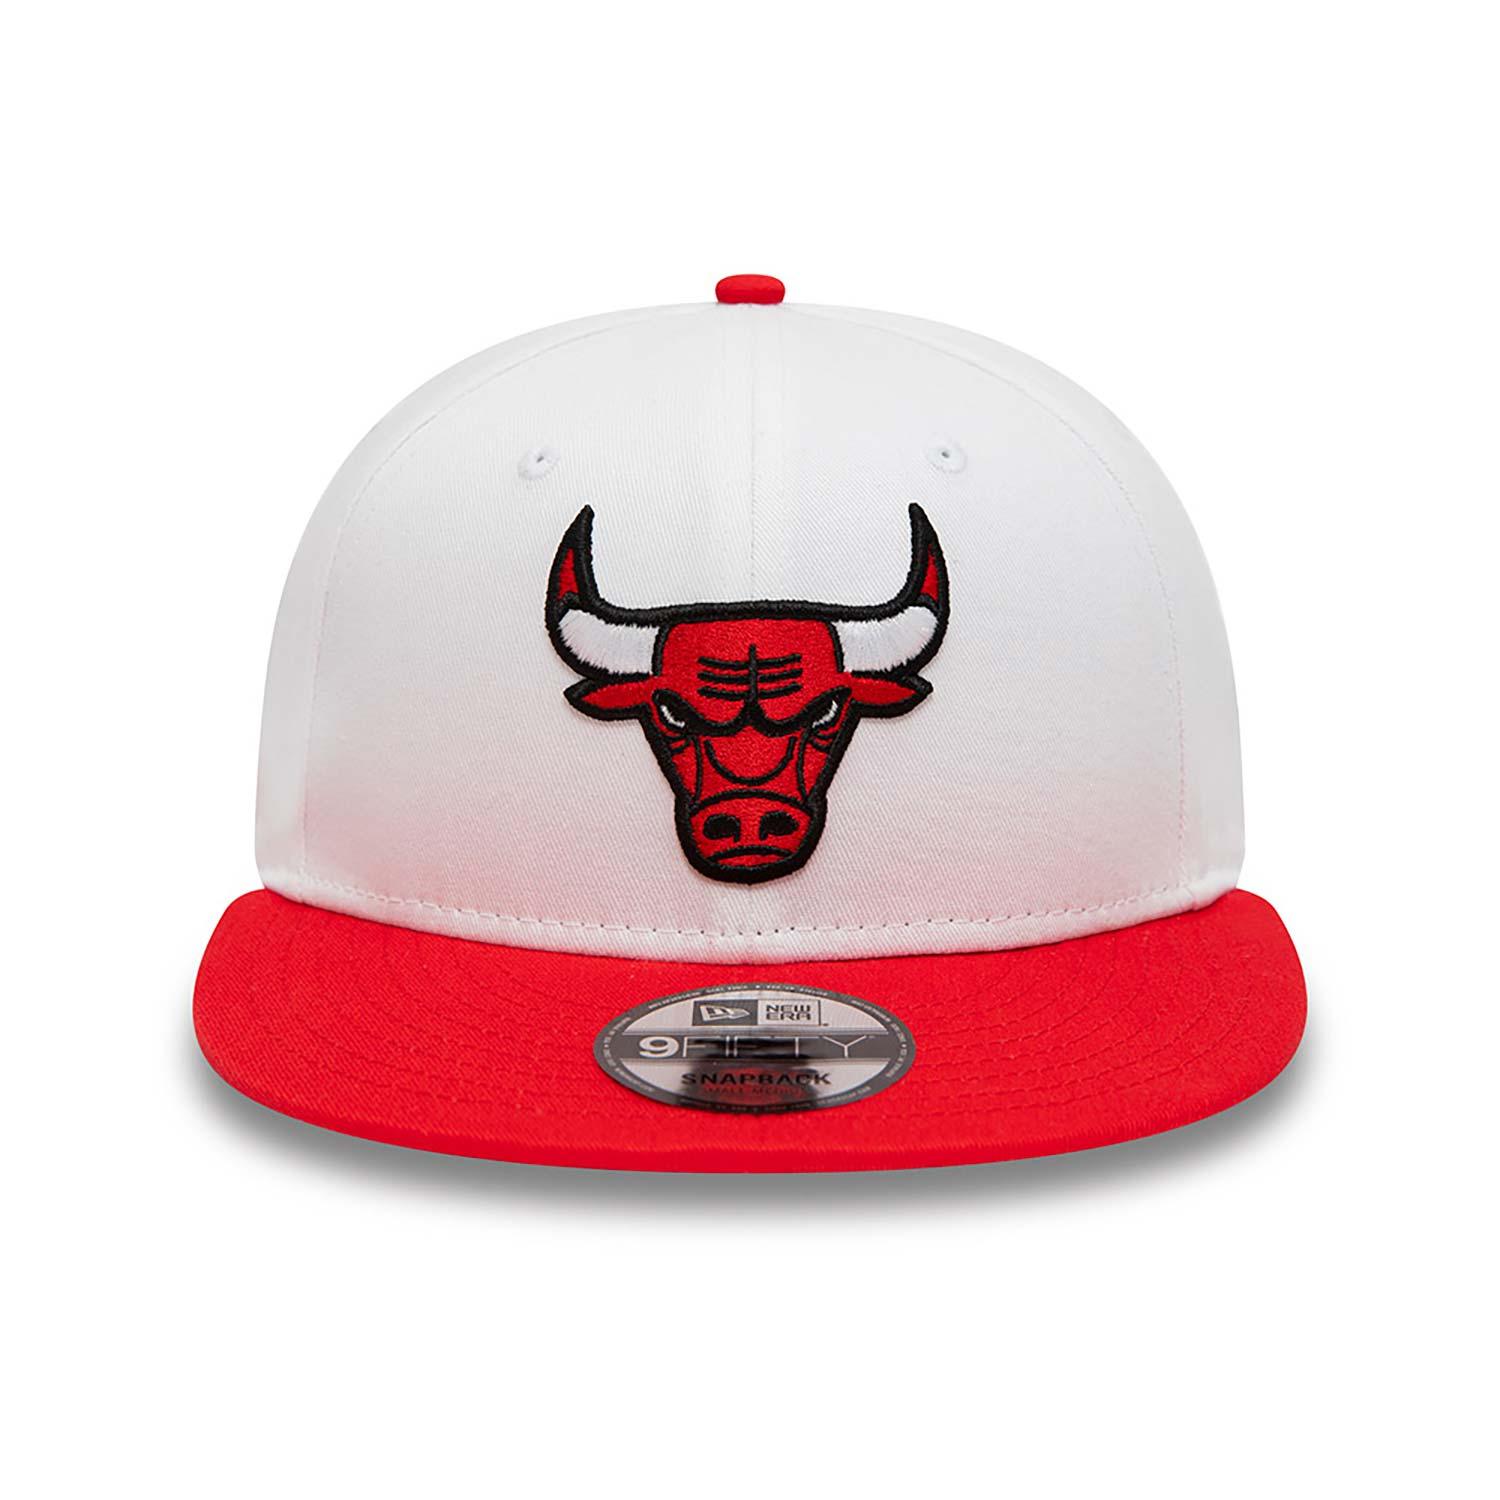 NEW ERA 9FIFTY WHITE CROWN PATCHES CHICAGO BULLS TWO TONE SNAPBACK - FAM